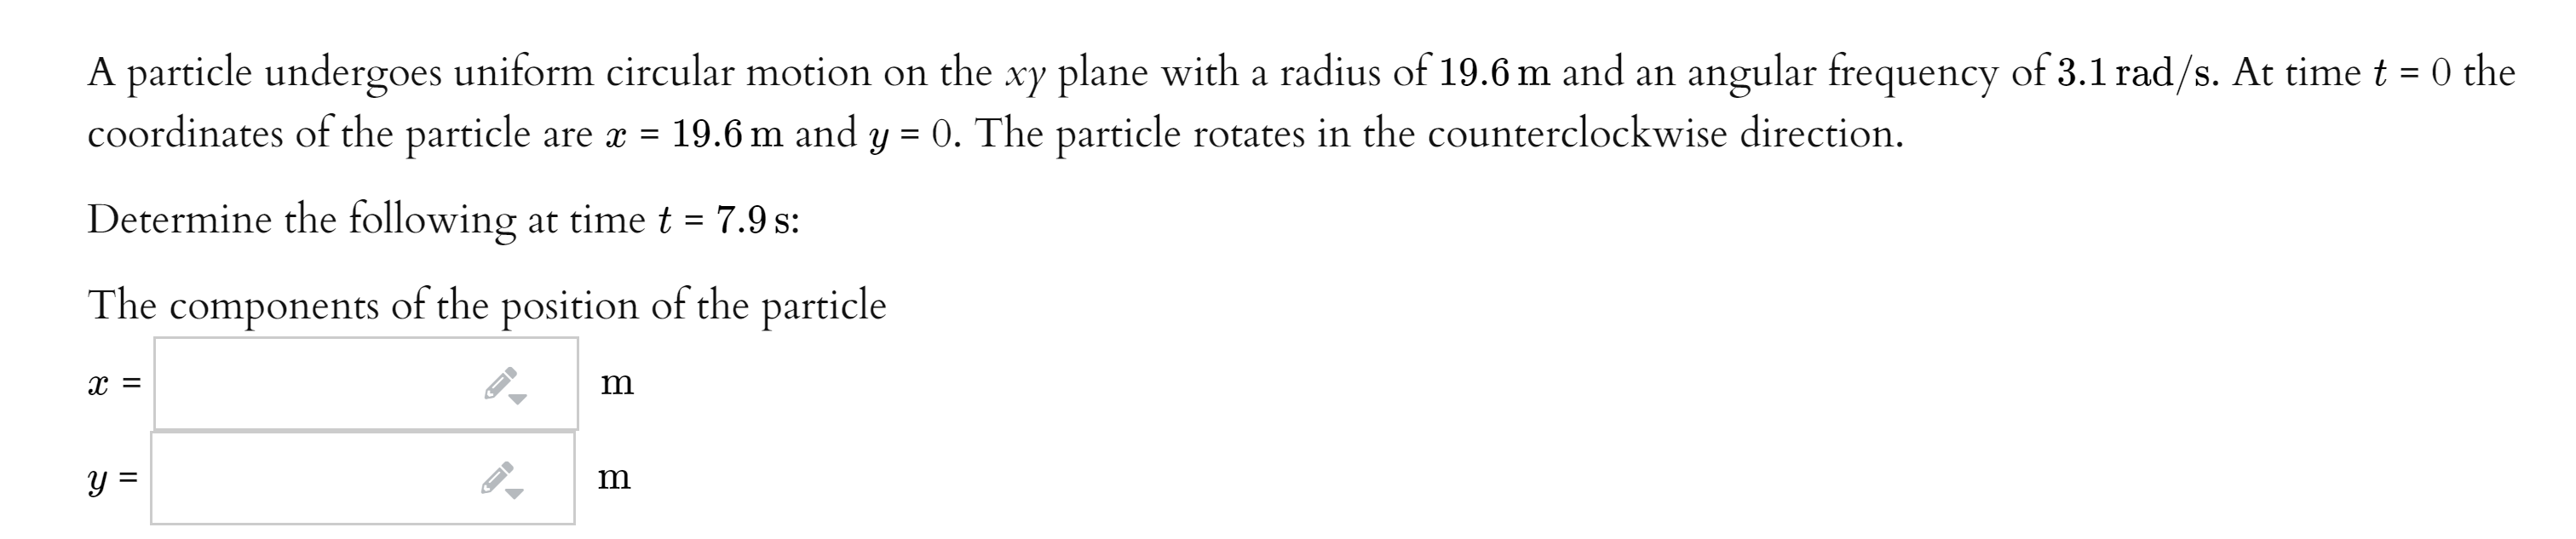 A particle undergoes uniform circular motion on the xy plane with a radius of 19.6 m and an angular frequency of 3.1 rad/s. At time t = 0 the
coordinates of the particle are x = 19.6 m and y = 0. The particle rotates in the counterclockwise direction.
Determine the following at time t = 7.9 s:
The
components
of the position of the particle
y =
m
